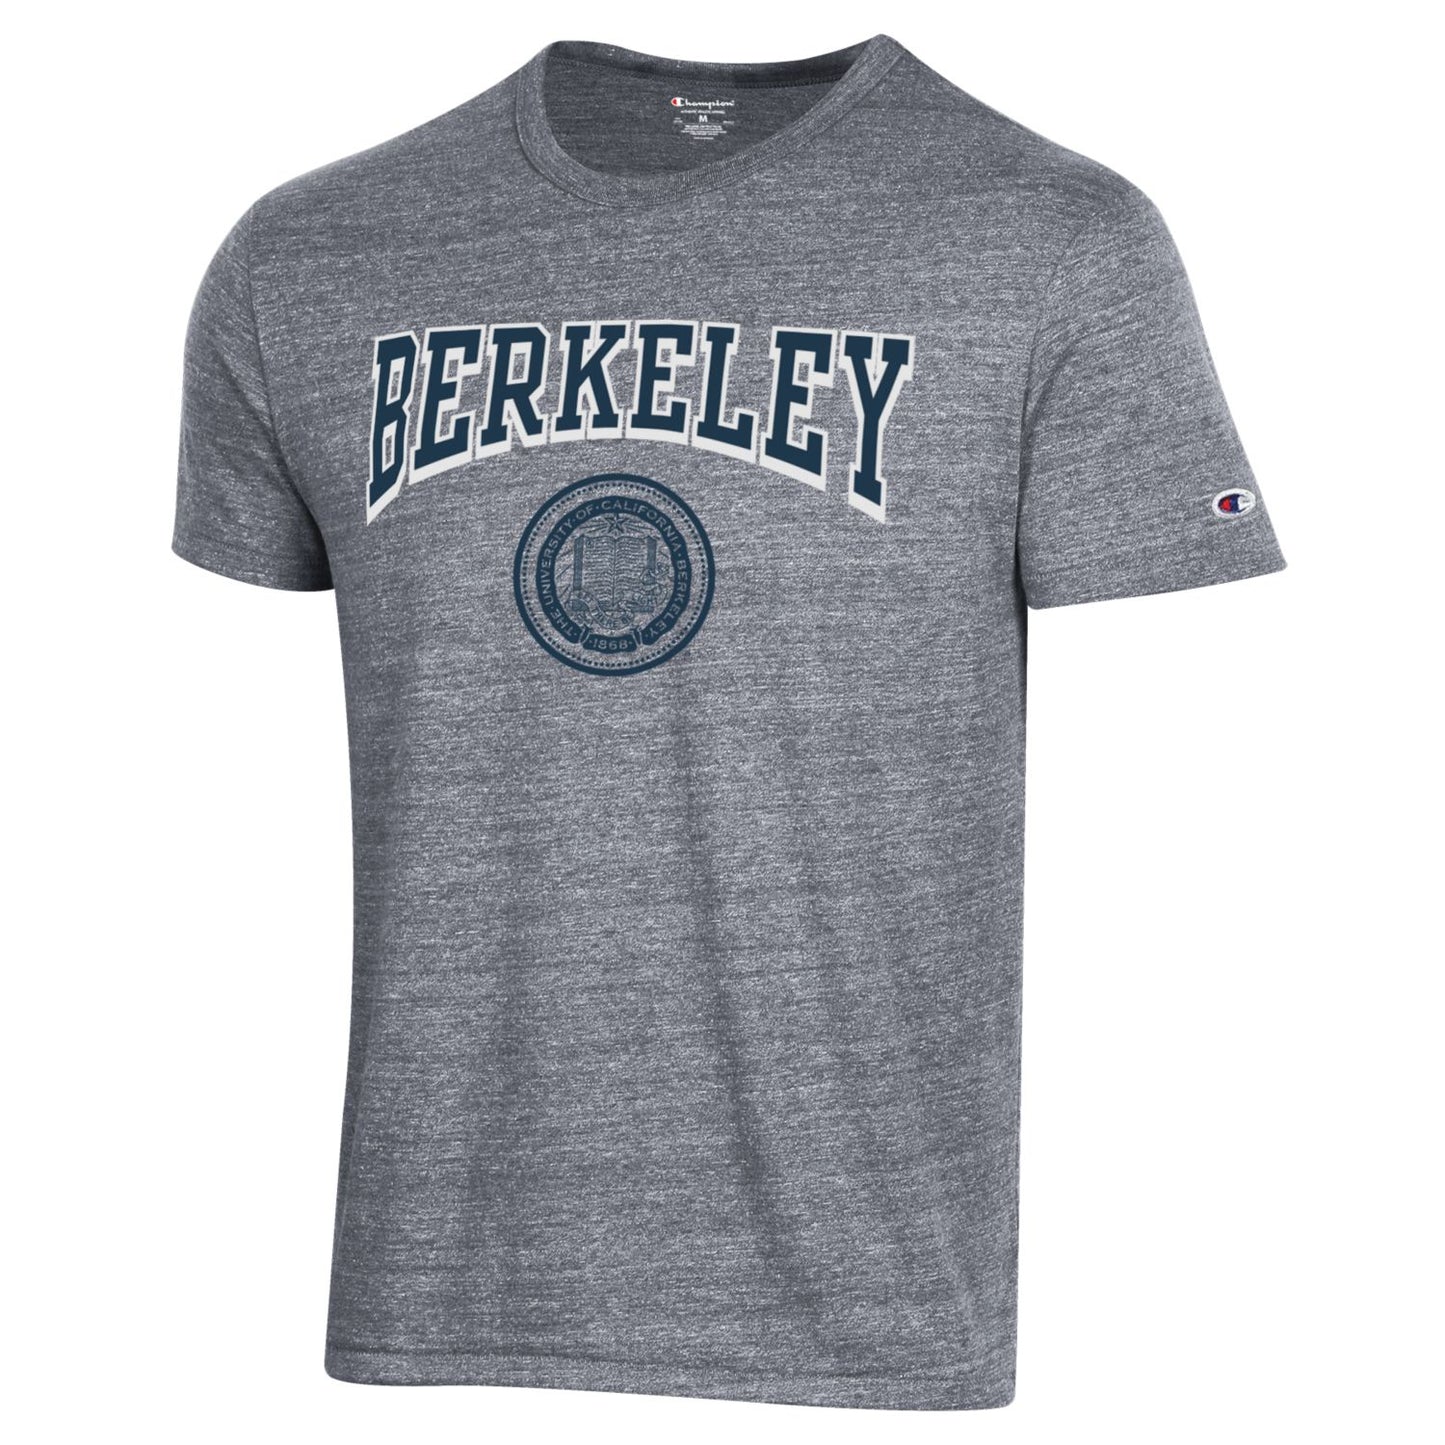 U.C. Berkeley arch and seal bow tie tri blend T-Shirt-Charcoal-Shop College Wear